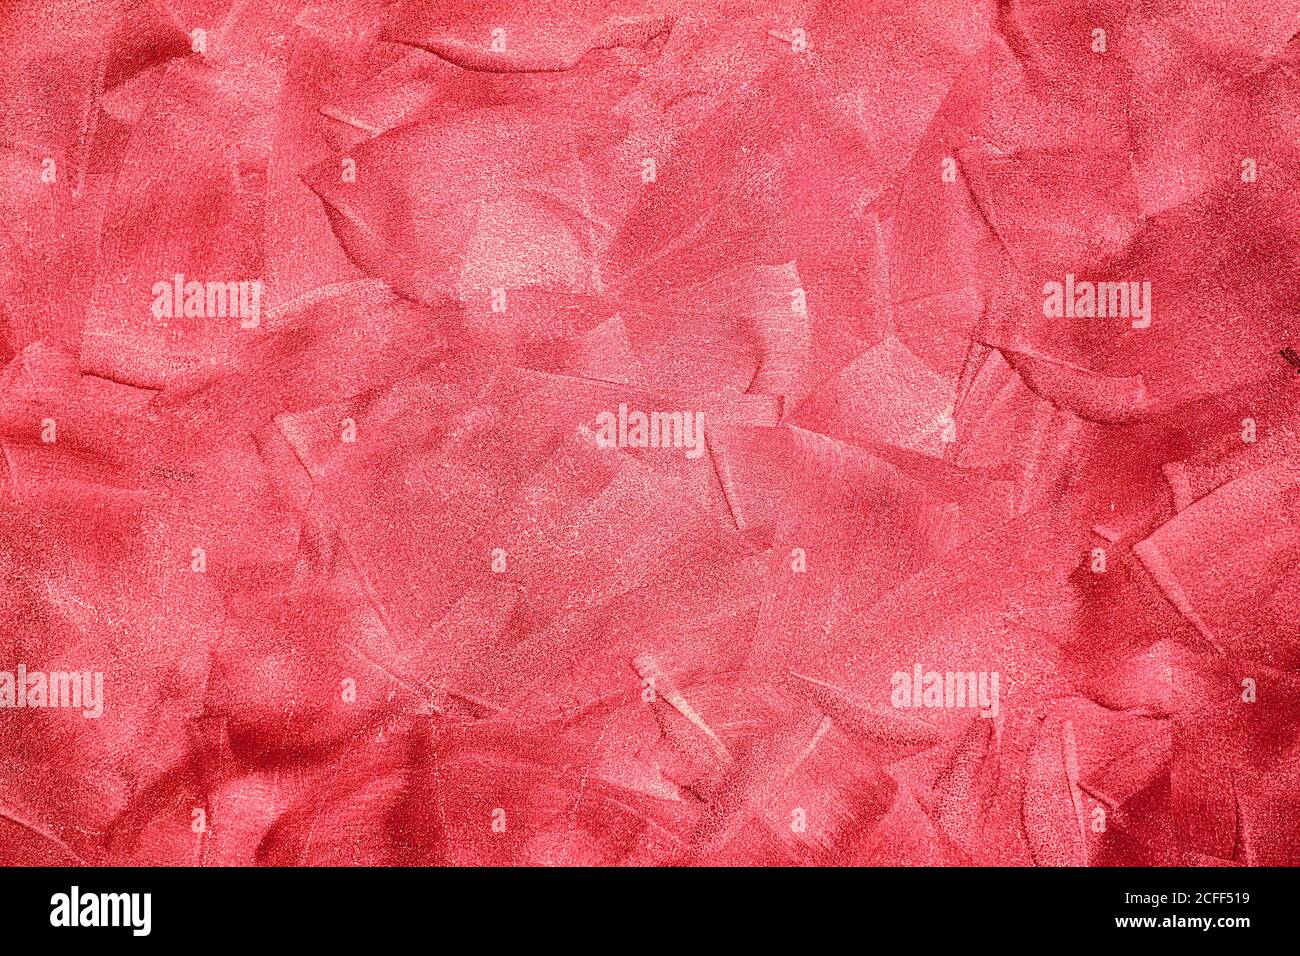 Background from a red plastered wall Stock Photo